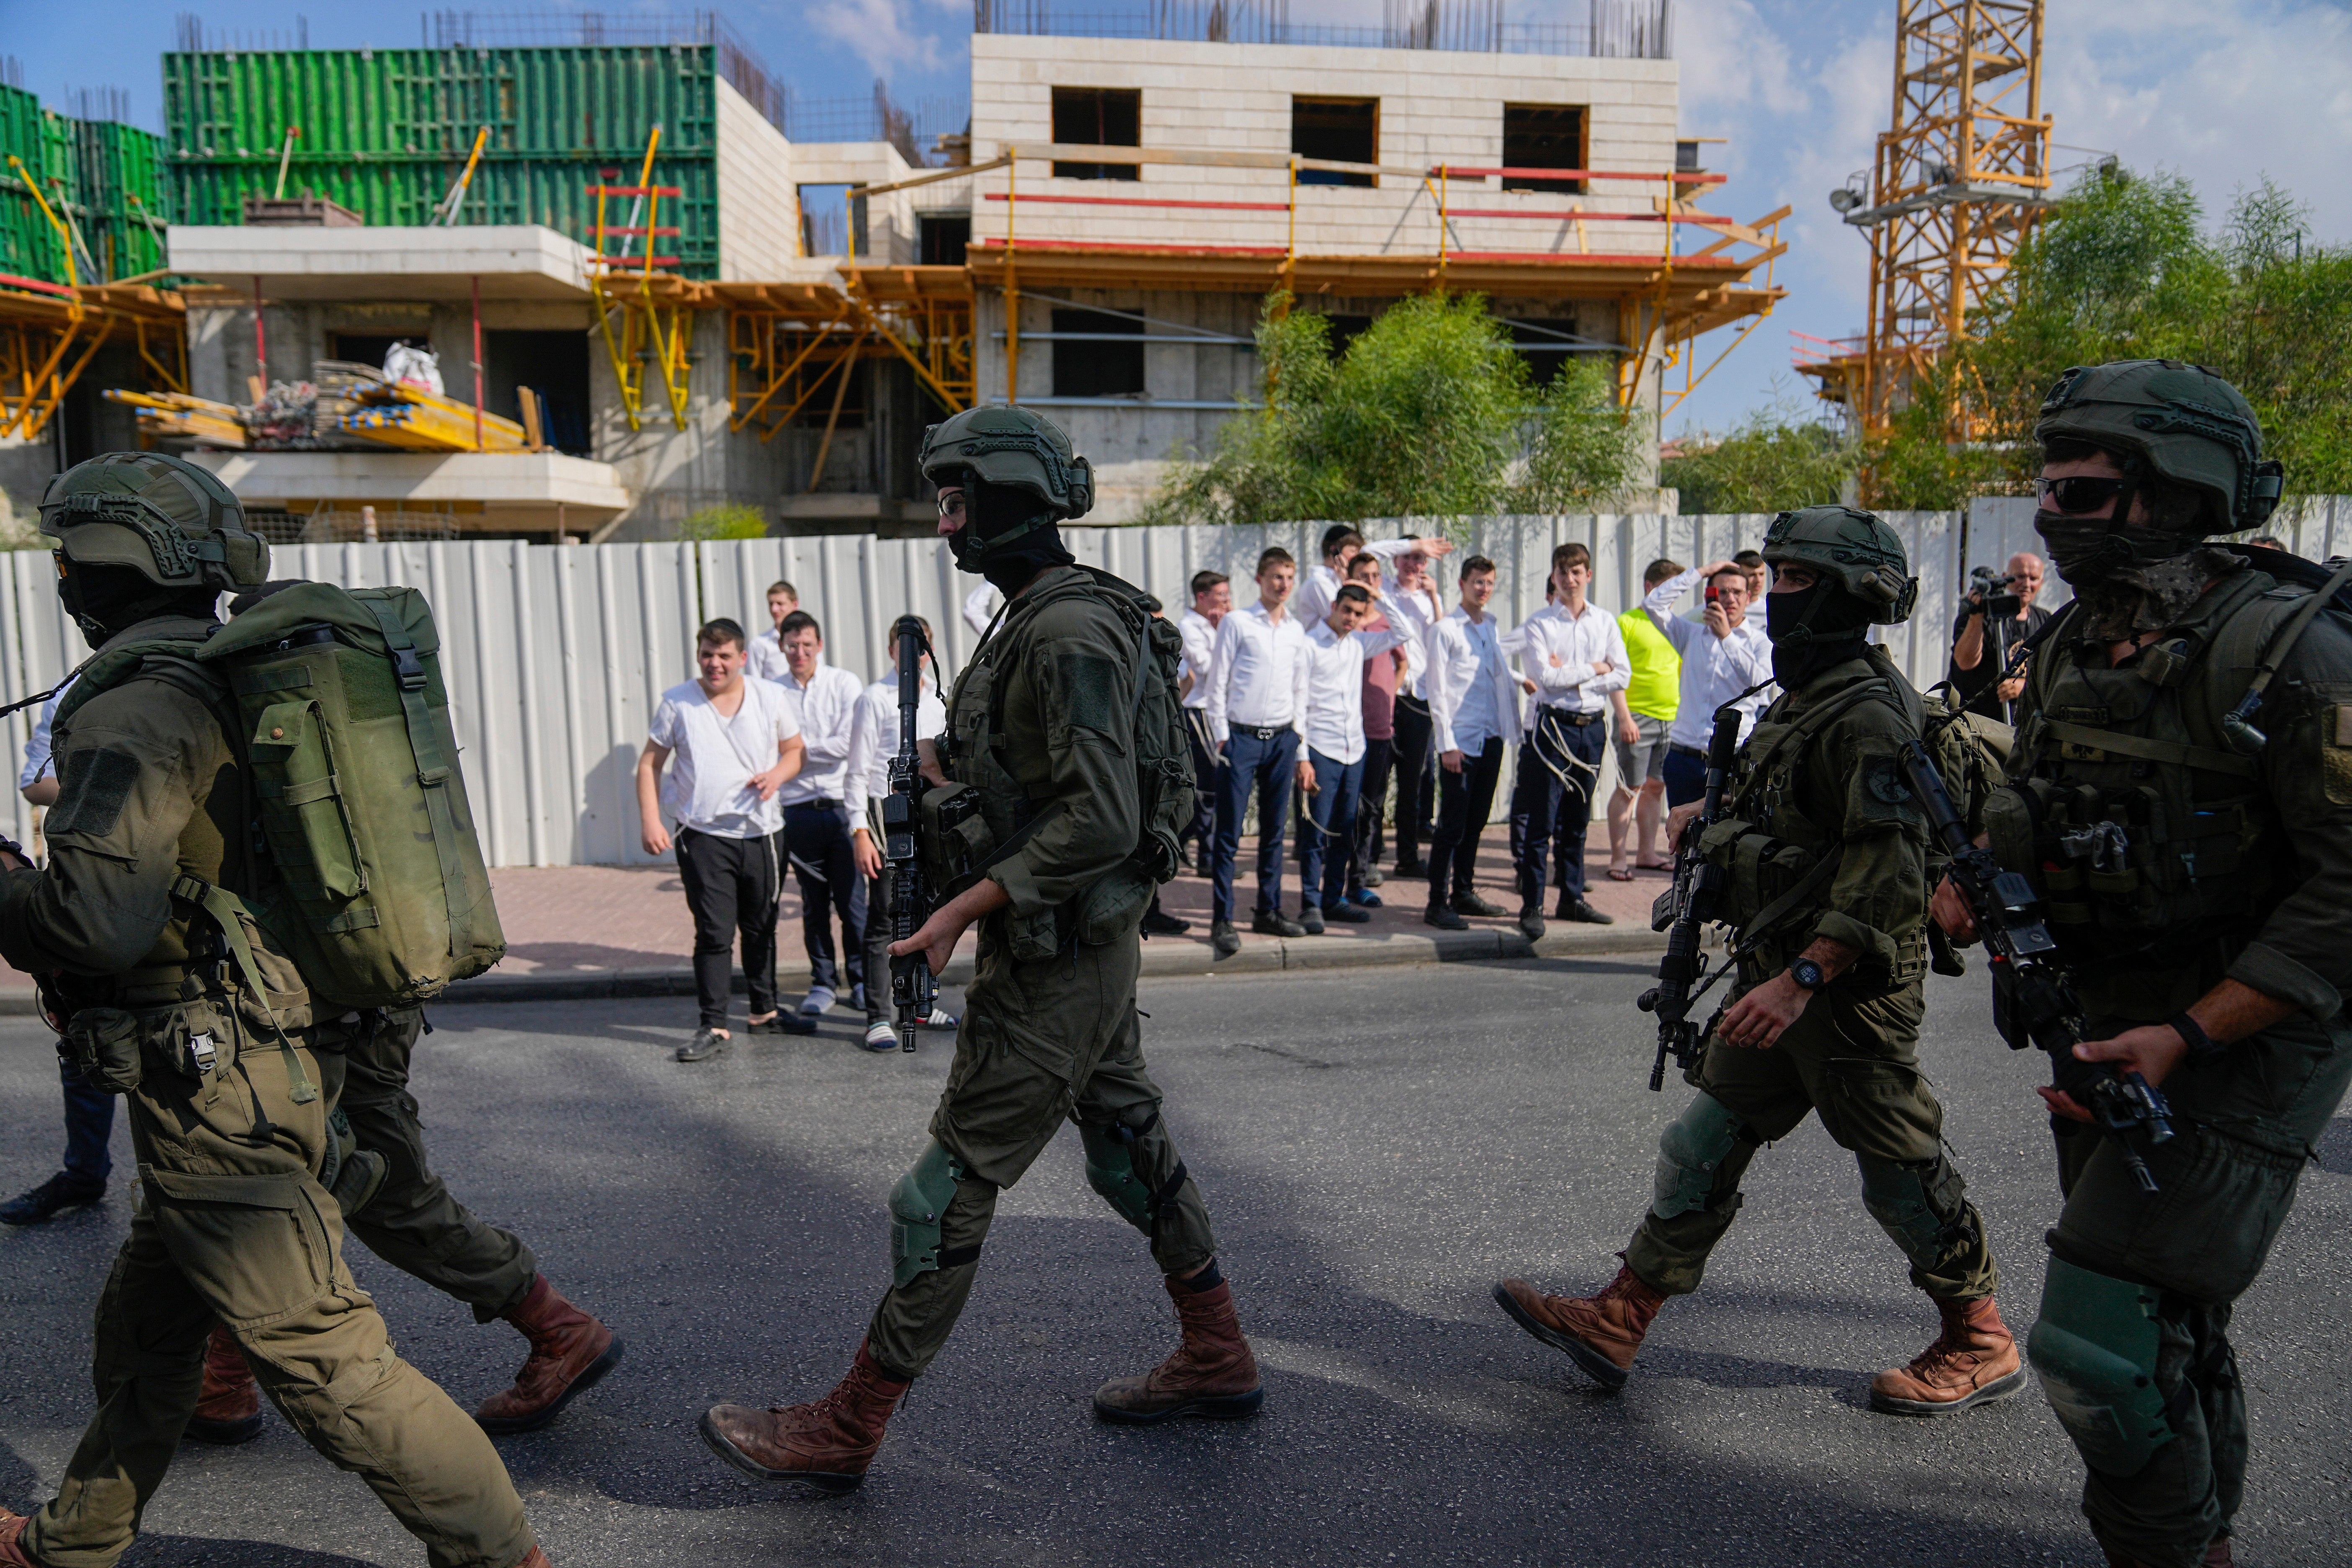 Israeli security forces are seen deployed at the site of a shooting attack in the West Bank Israeli settlement of Maale Adumim, Tuesday, Aug 1, 2023